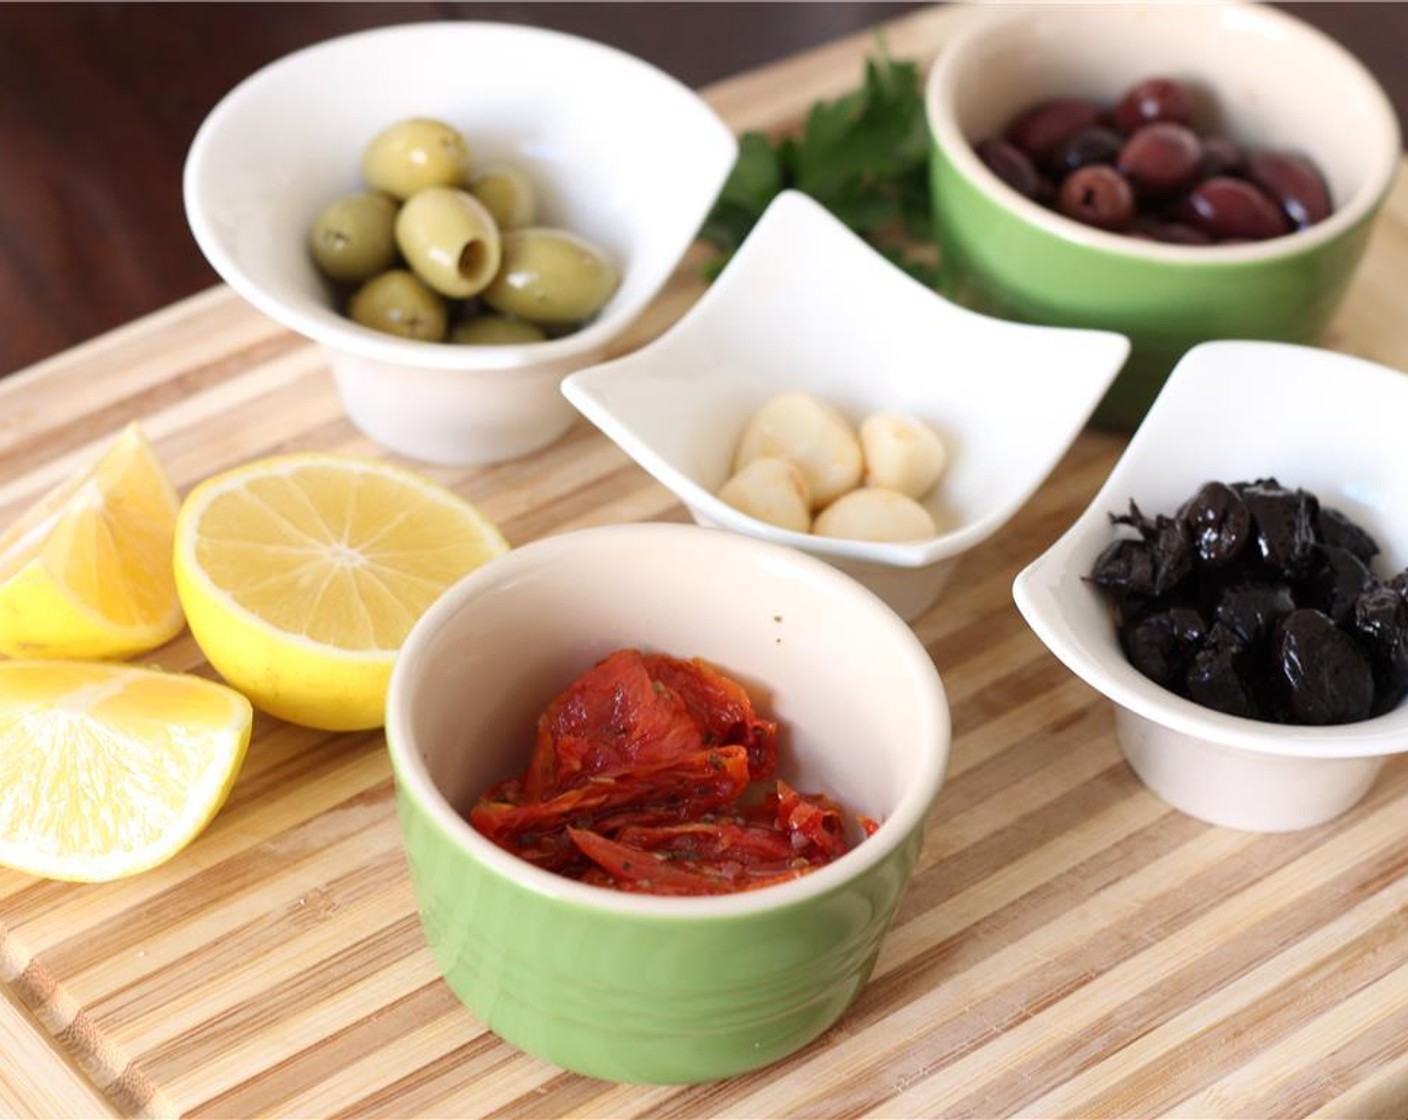 step 1 Prepare your ingredients: measure the Kalamata Olives (1/2 cup), Green Olives (1/4 cup), Beldi Olives (1/4 cup), and Roasted Tomatoes (1/4 cup) and peel the Garlic (2 cloves).